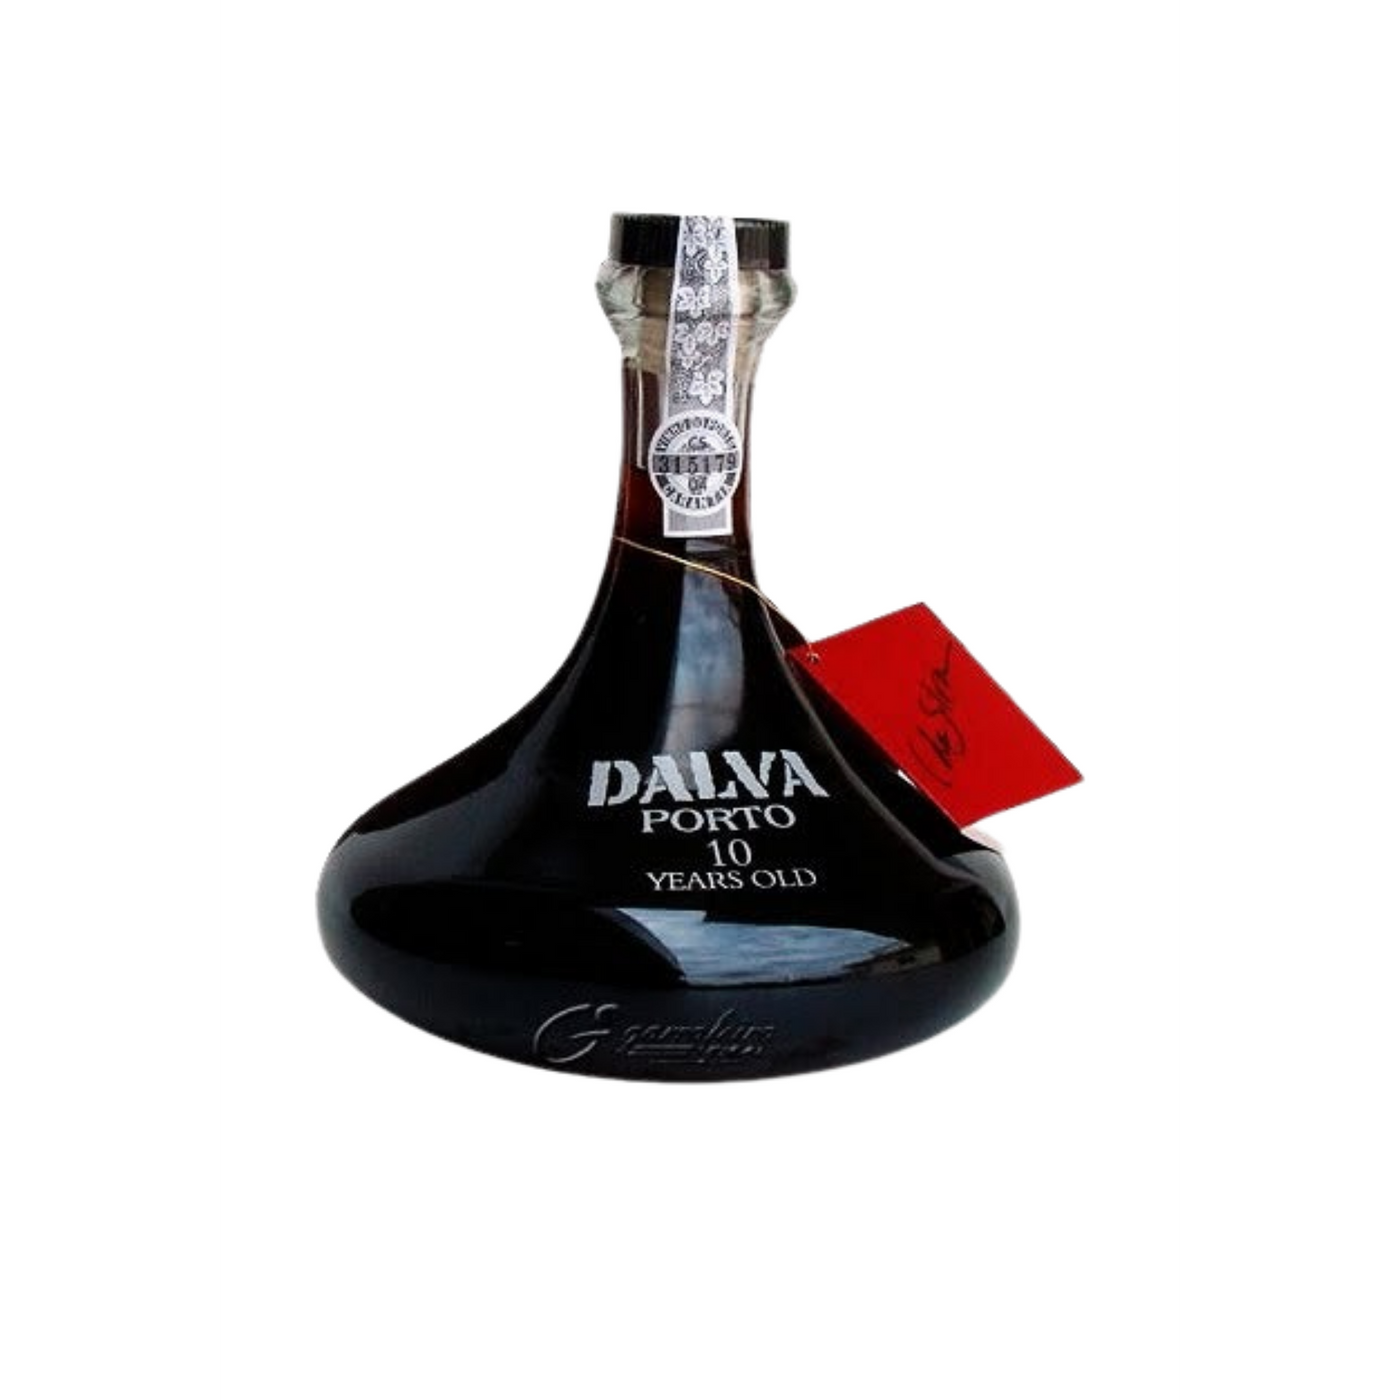 Dalva Port 10 Year Old Decanter Size: 75cl